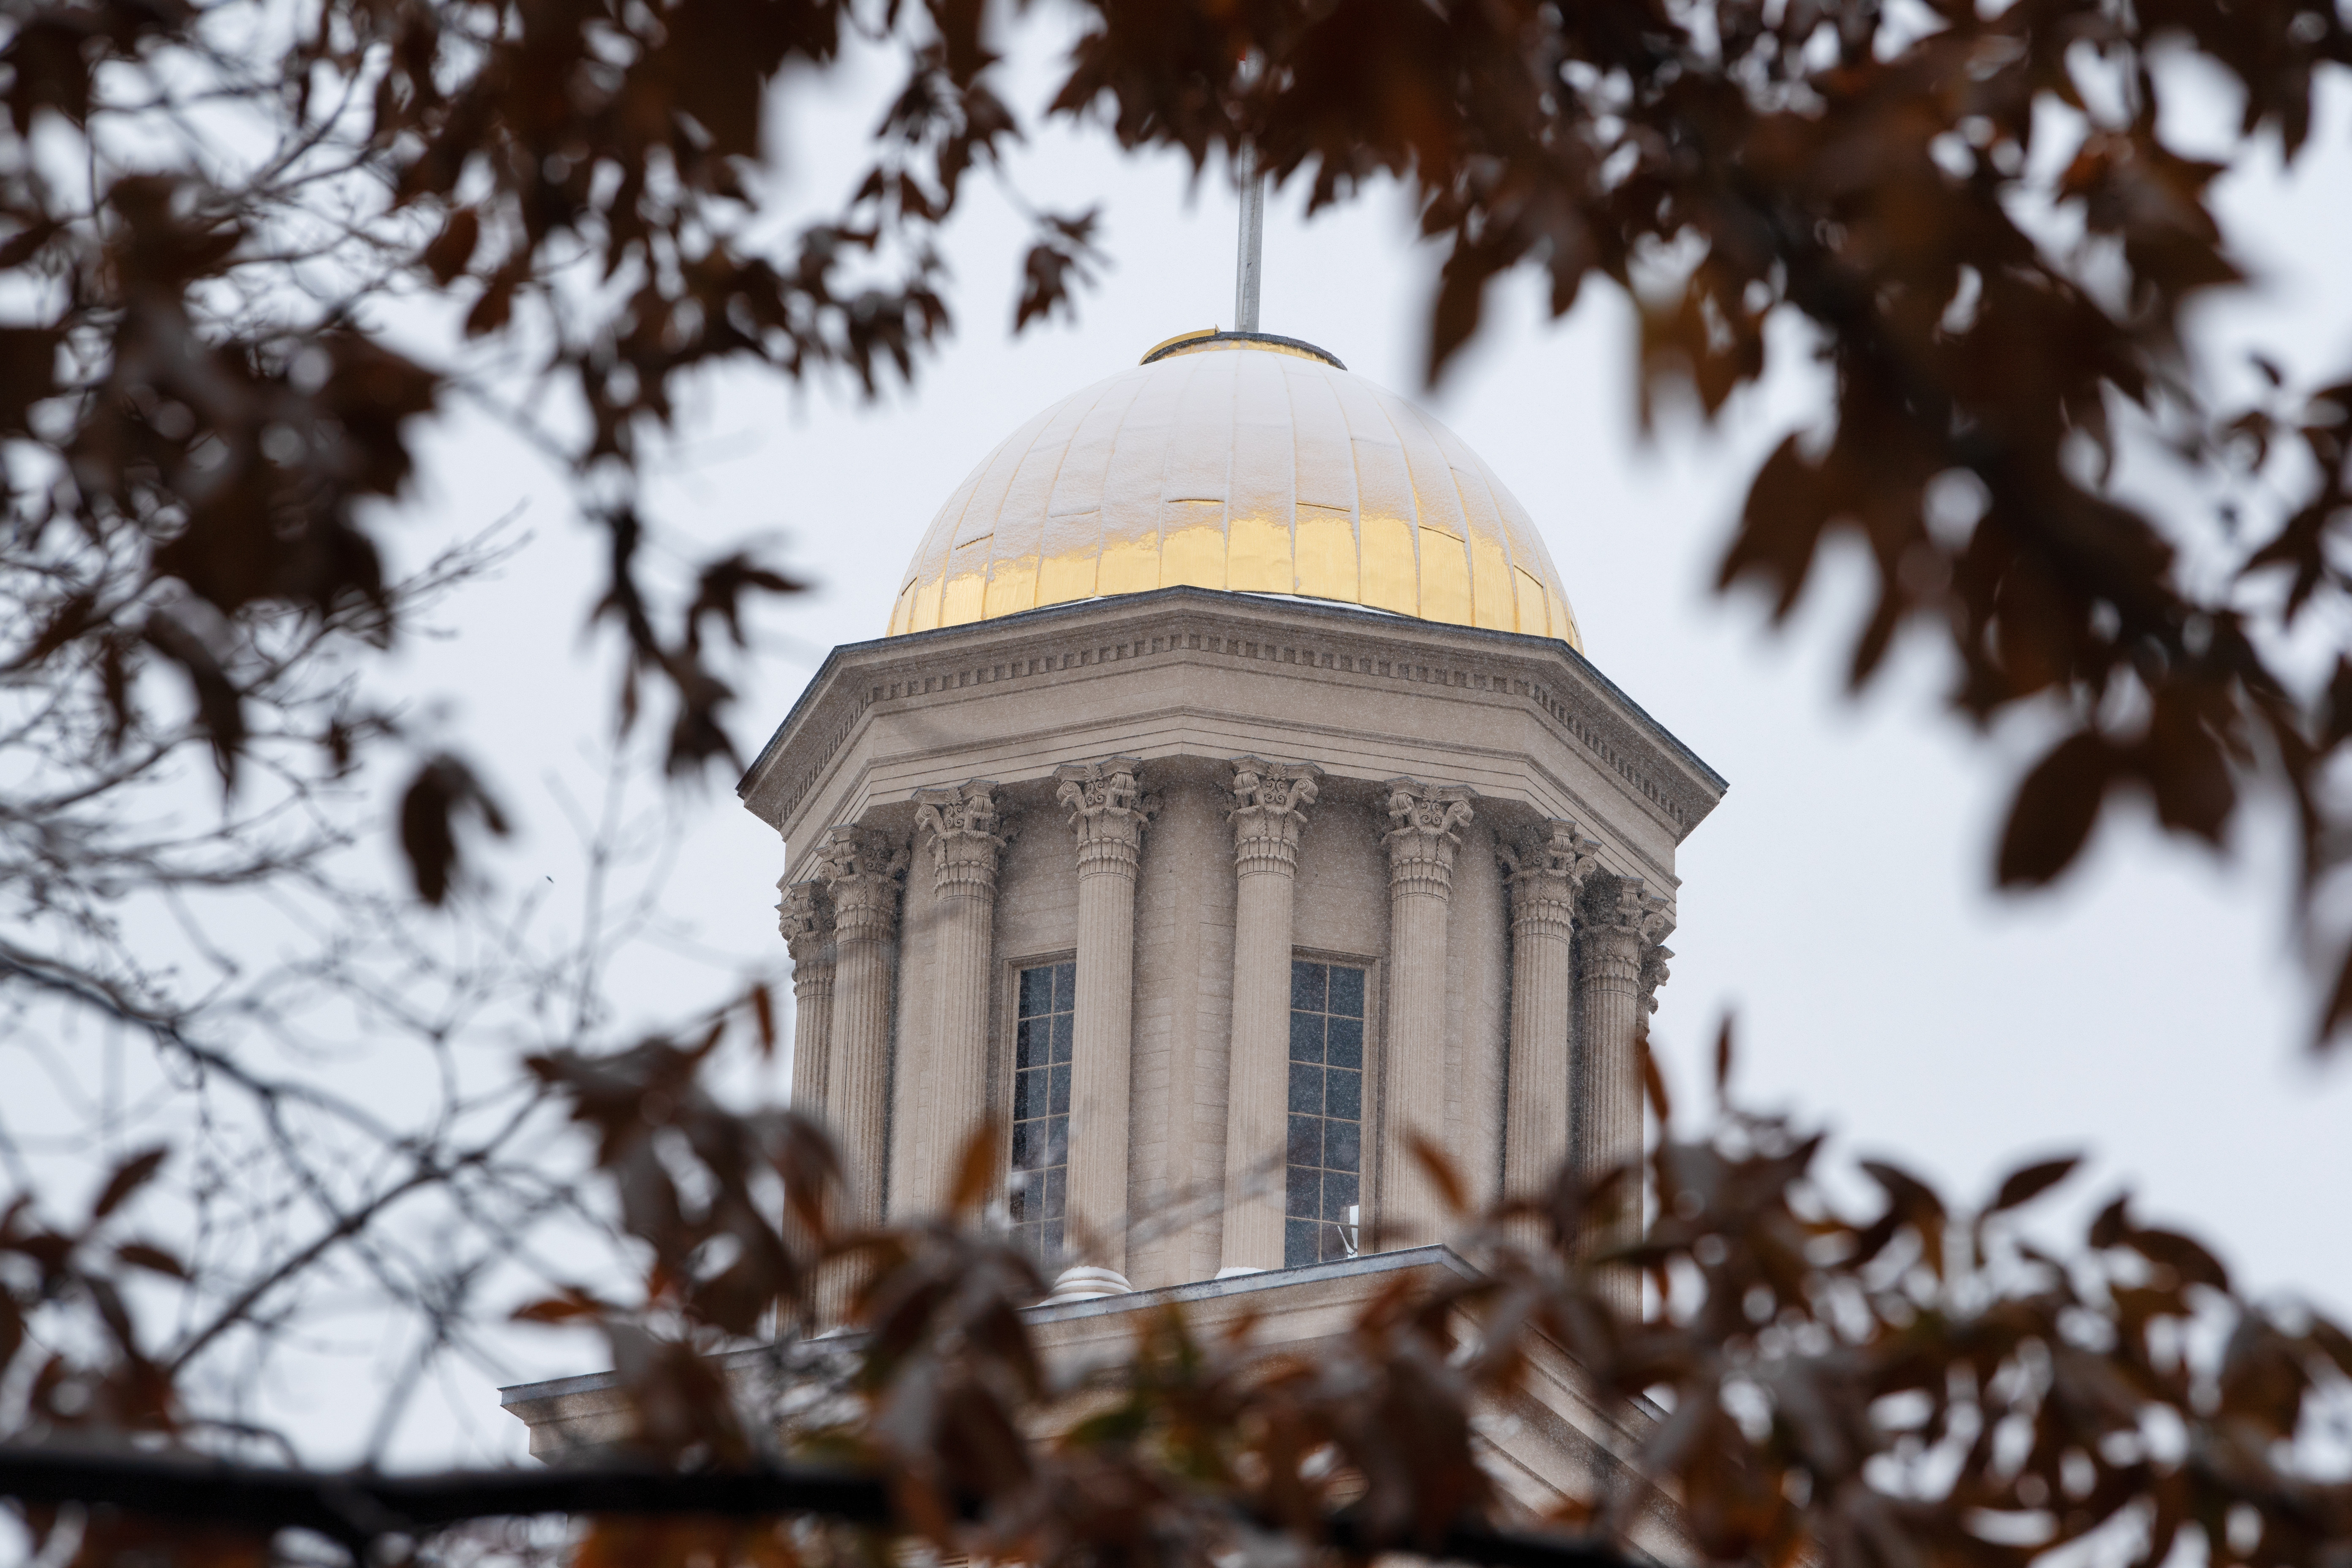 A dusting of snow covers the dome of the Old Capitol Building on the University of Iowa campus in November 2022.